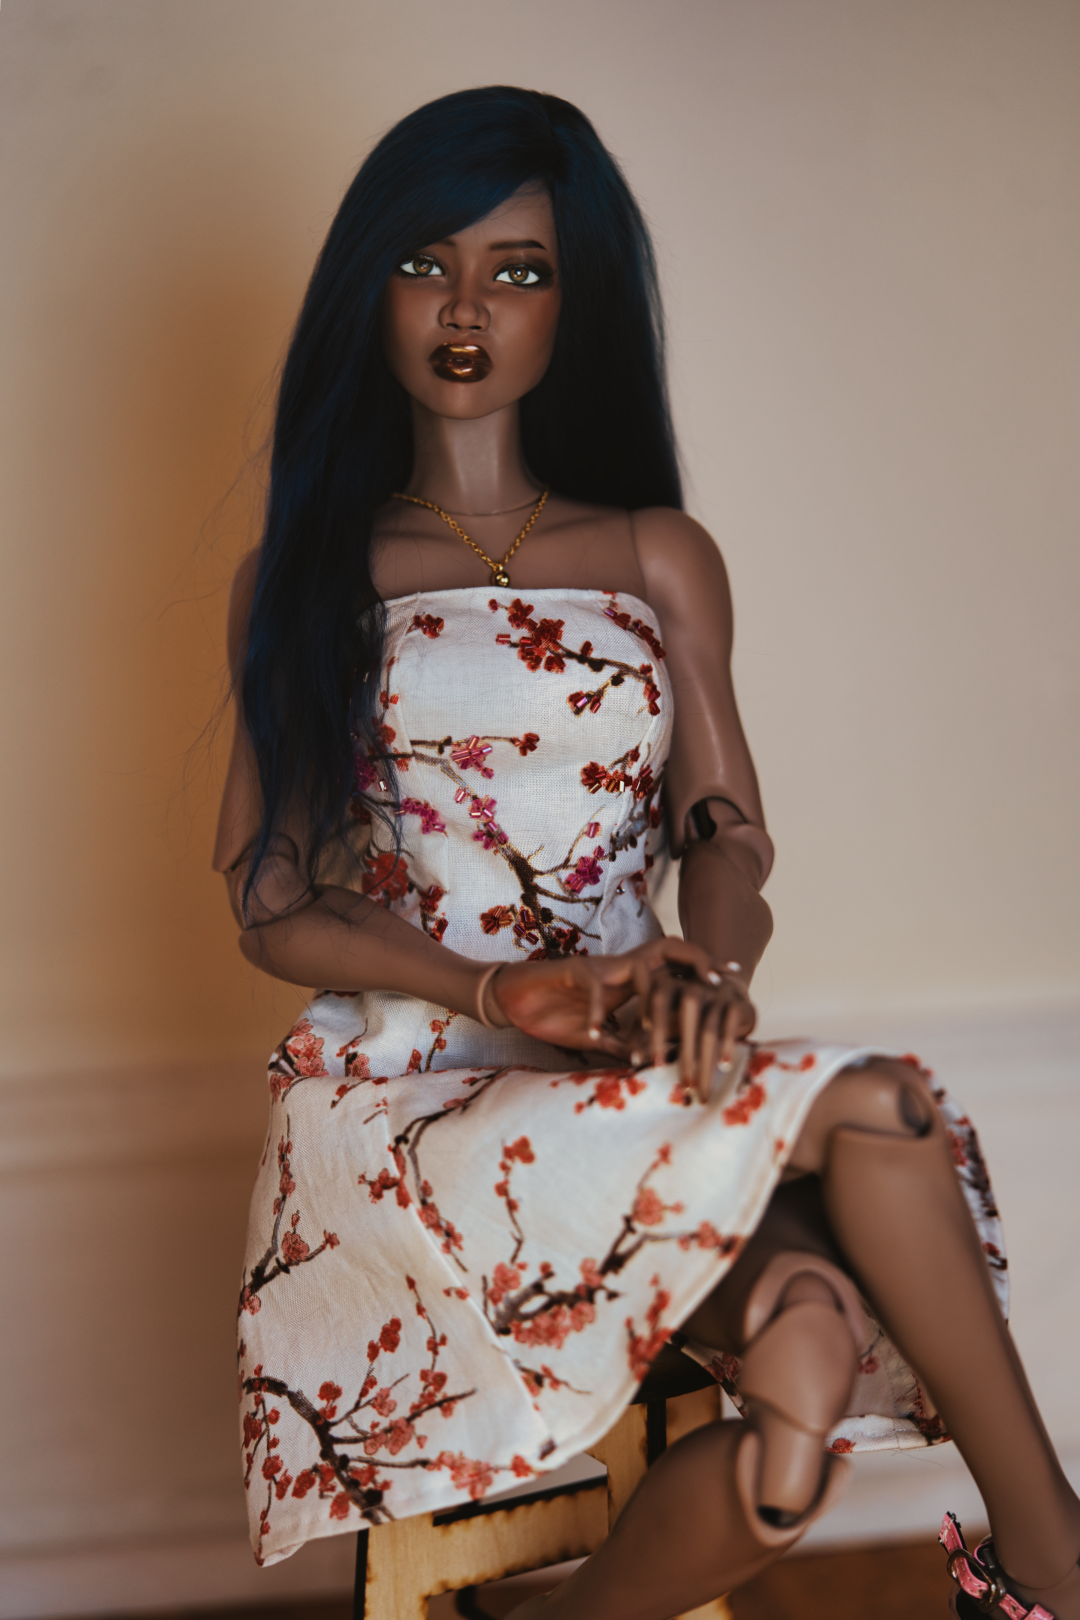 A Black female doll with long straight dark blue hair in a plum blossom dress sitting with one leg crossed over the other on a wooden stool.